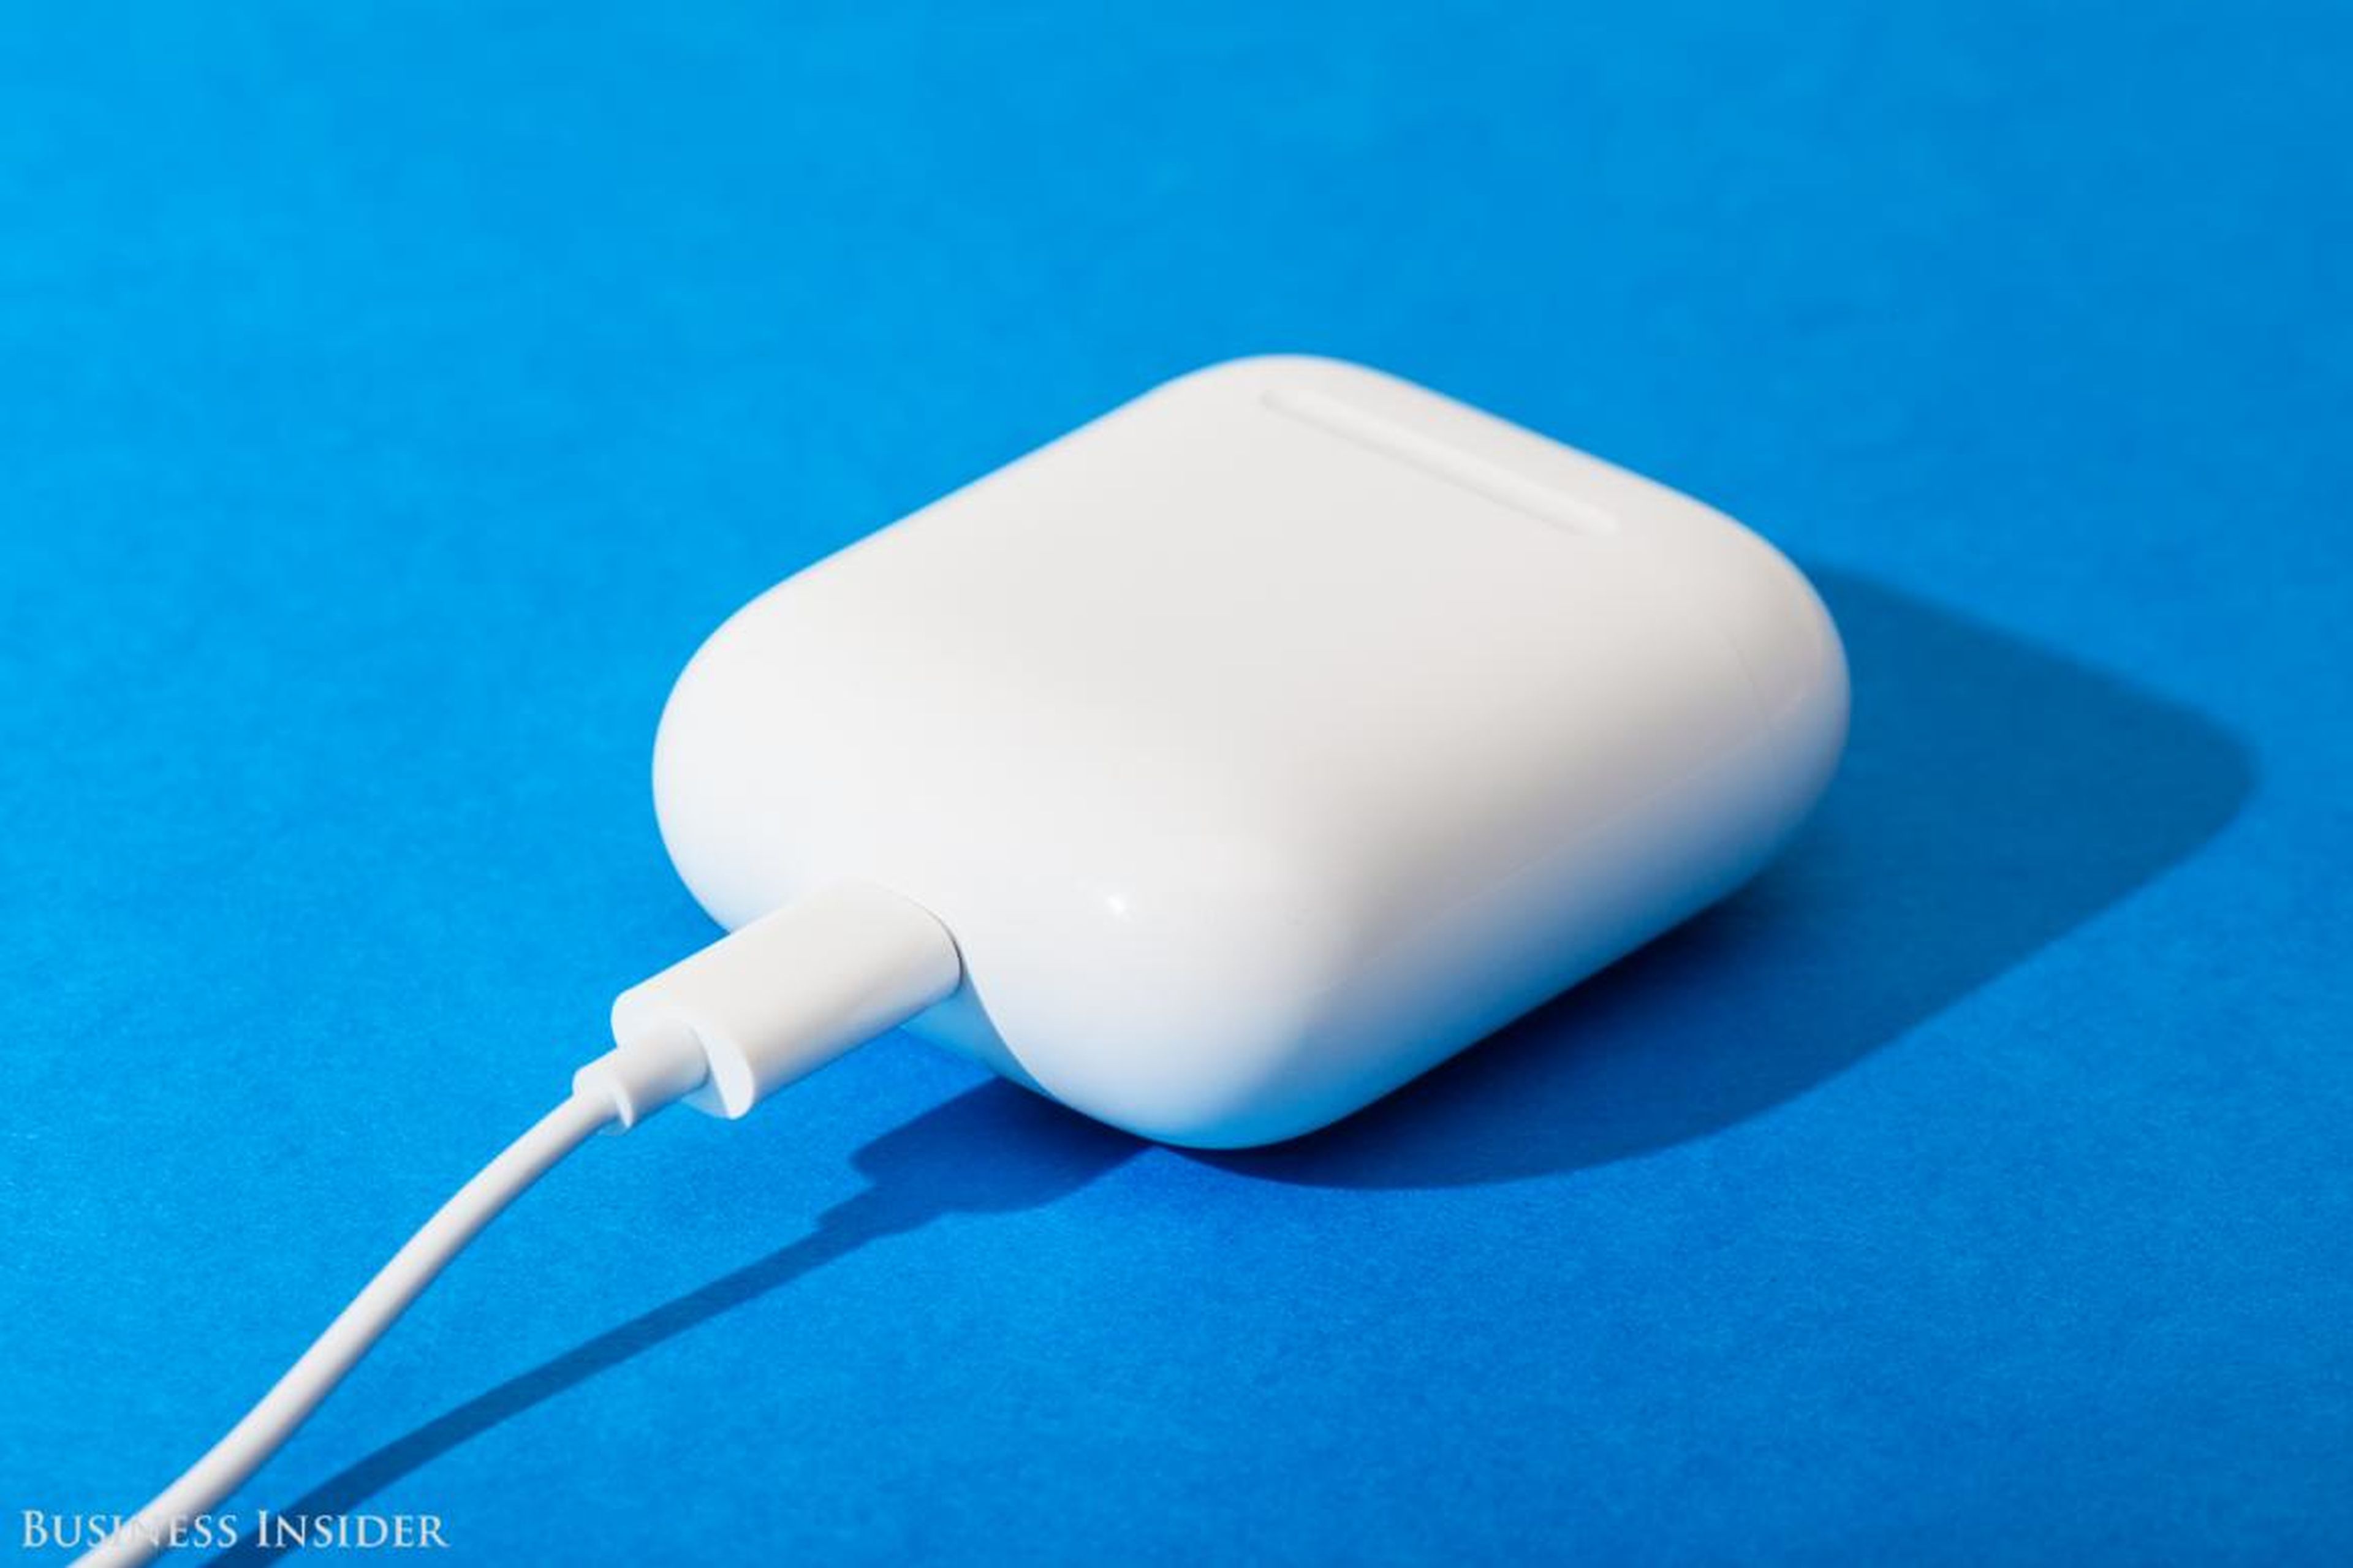 There's also another rumor, via Japan, that you may be able to charge your phone from your AirPods case.